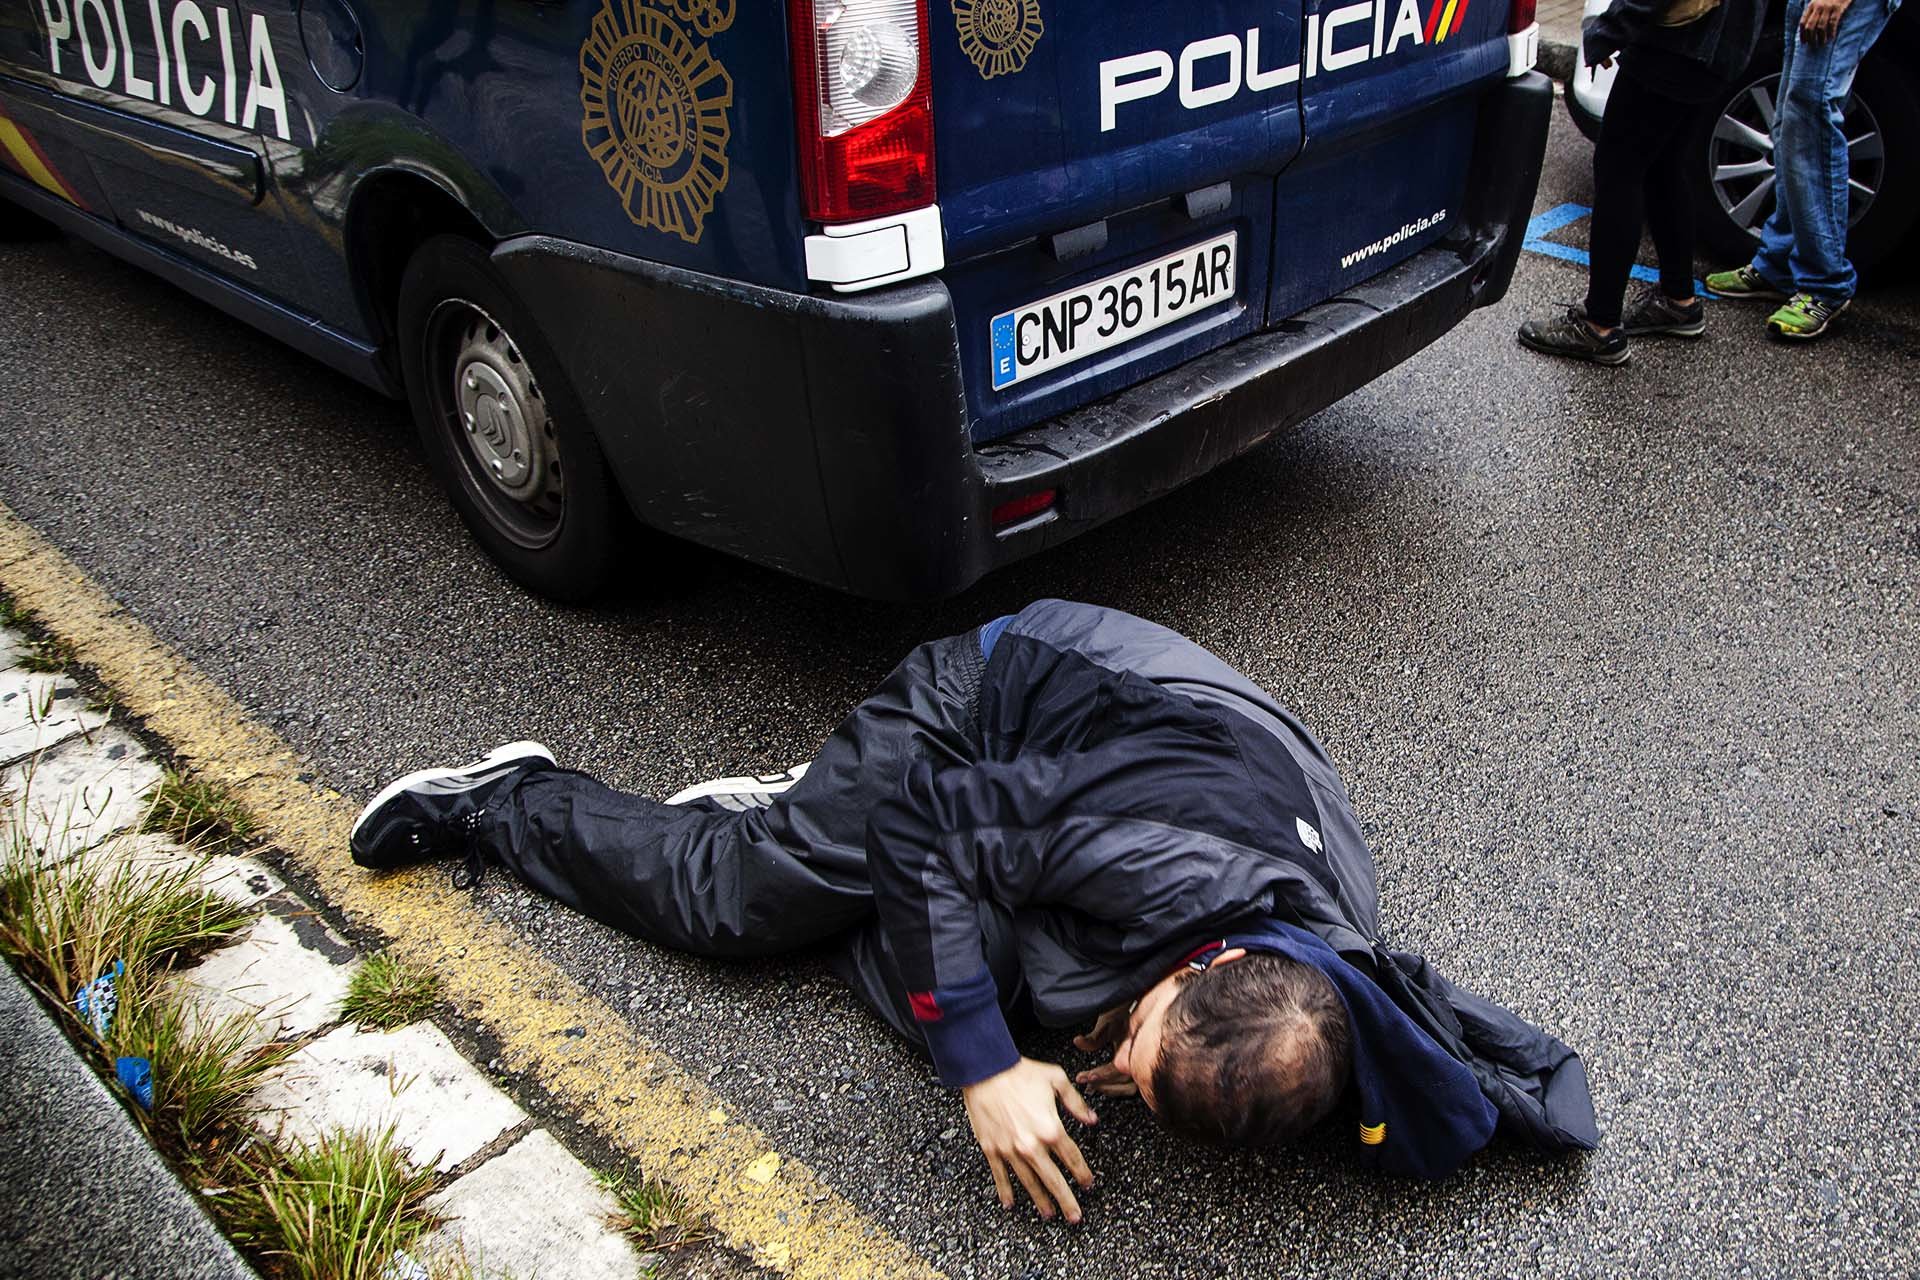 A citizen is injured by members of the Spanish National Police during an operation to requisition ballot boxes at a polling station in Barcelona.